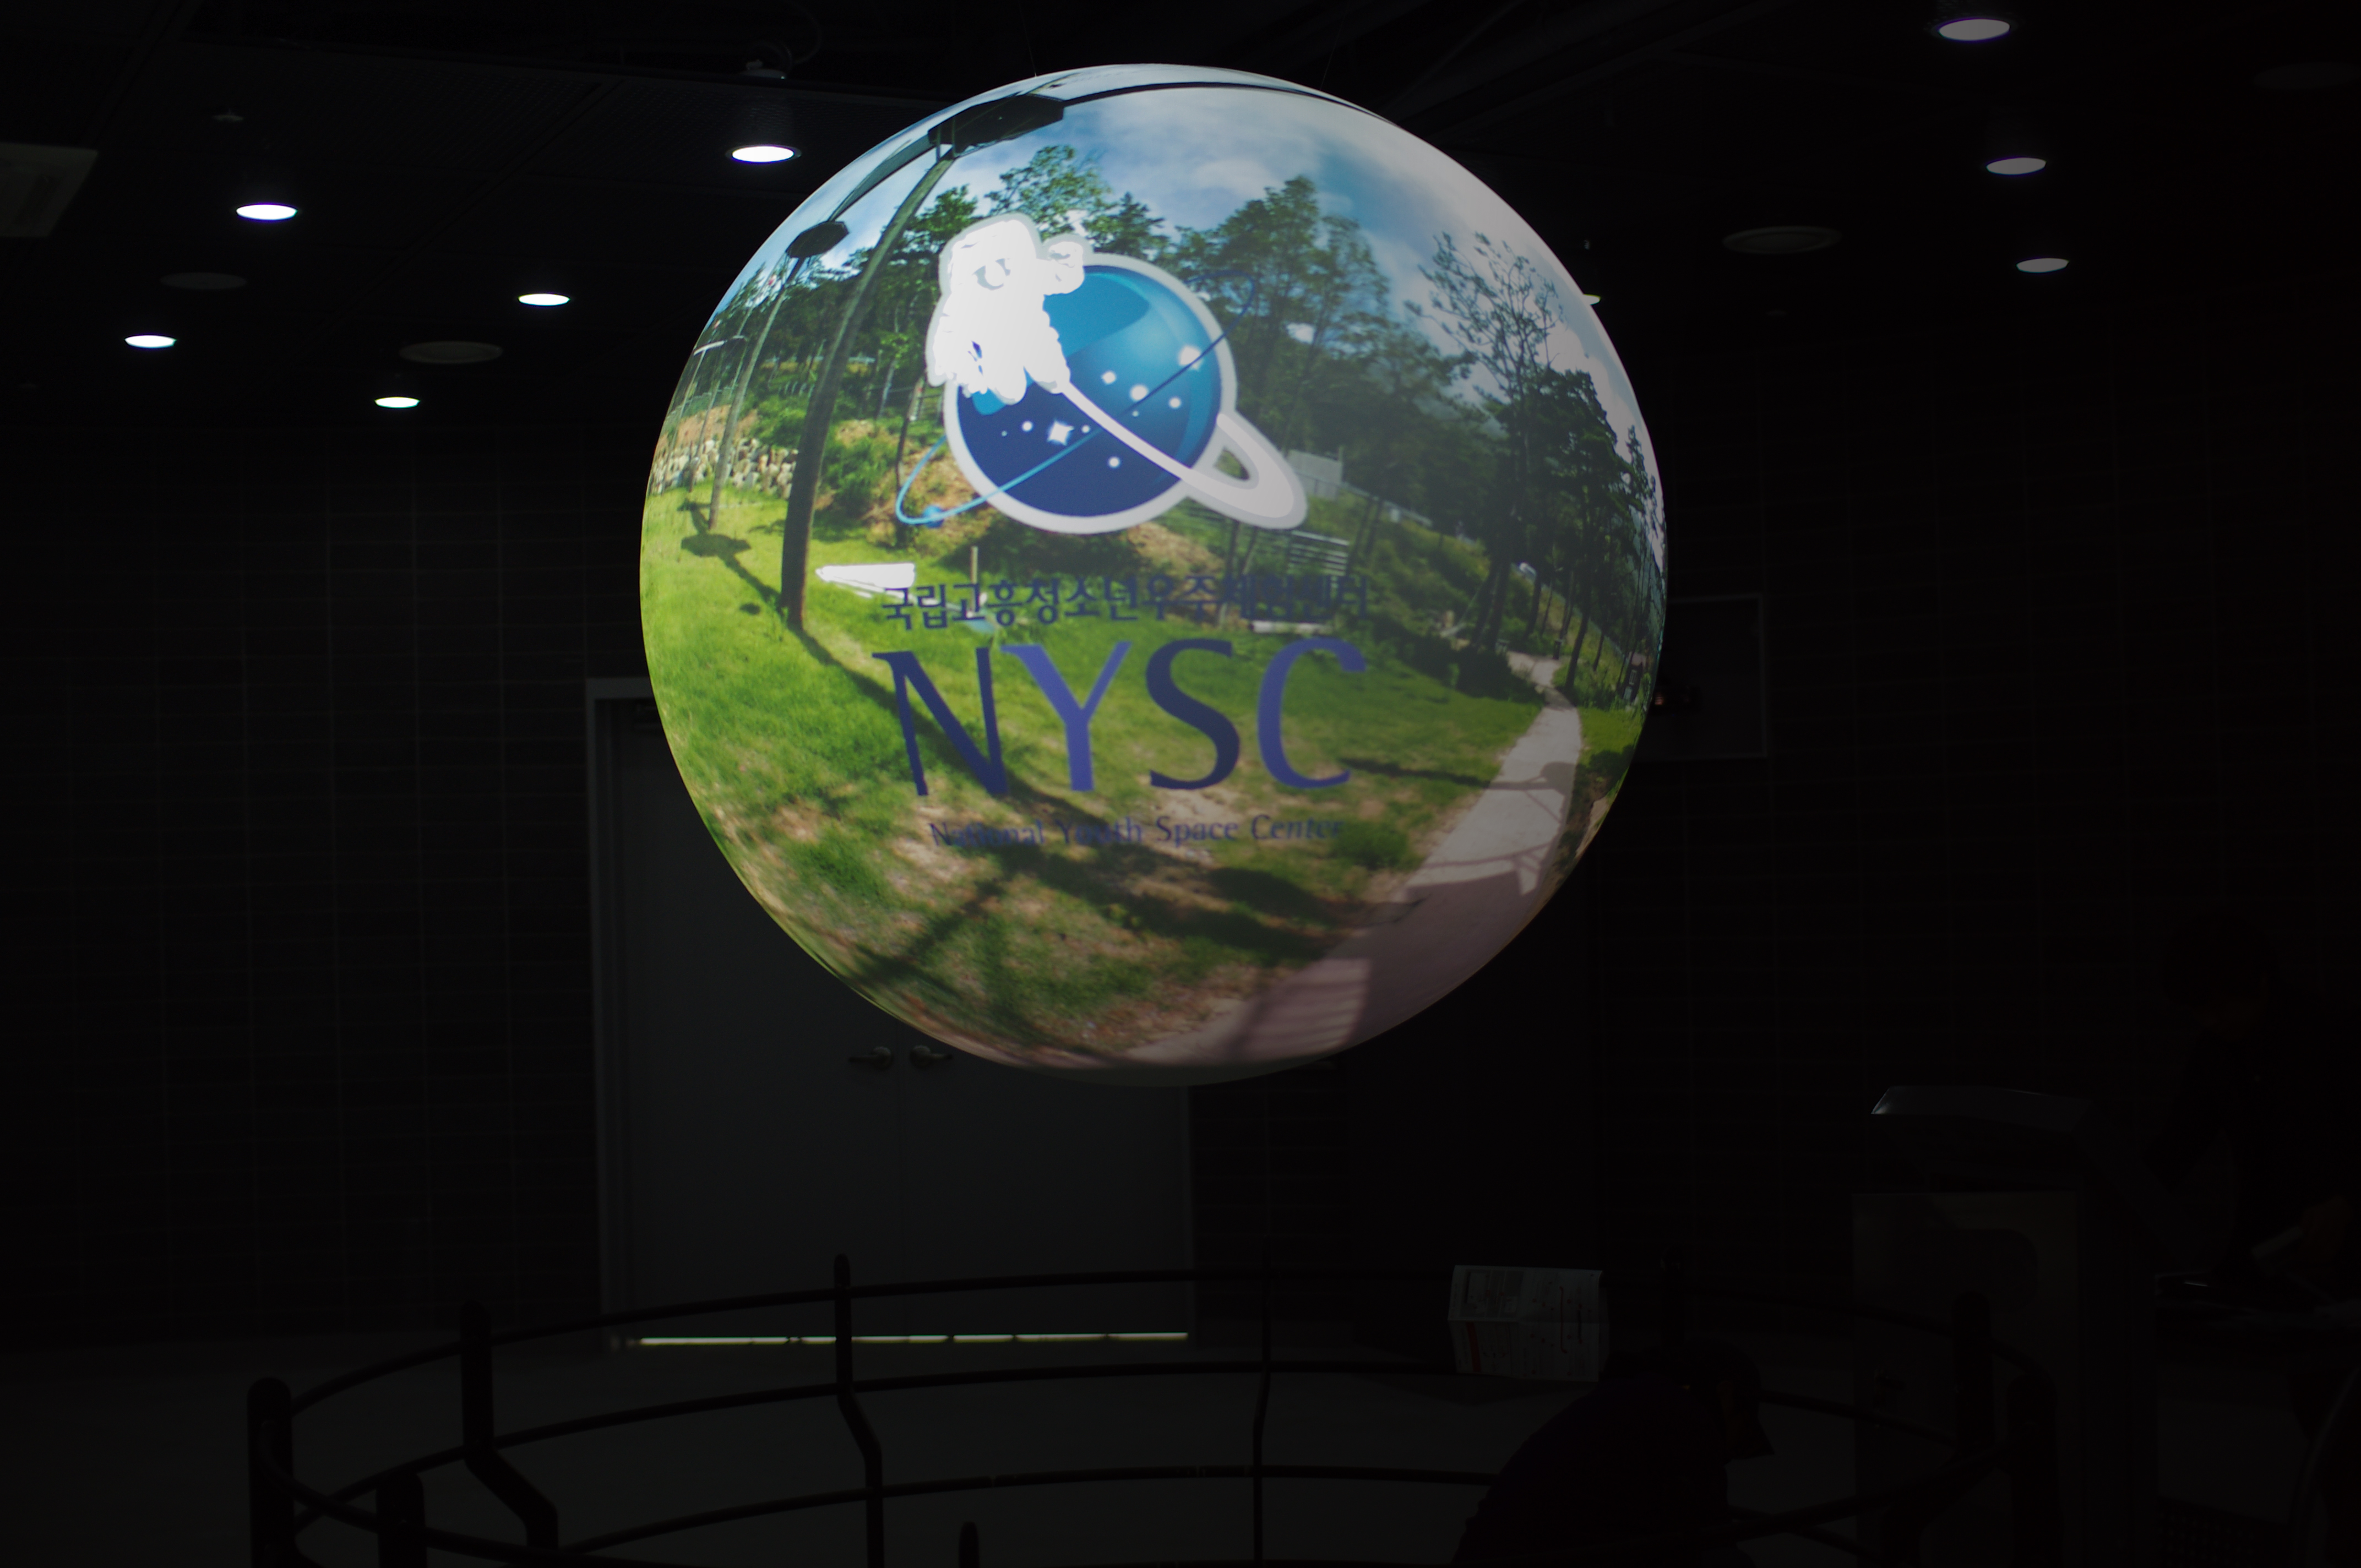 Science On a Sphere displays the National Youth Space Center logo atop a photograph including a sidewalk, some grass, and some trees